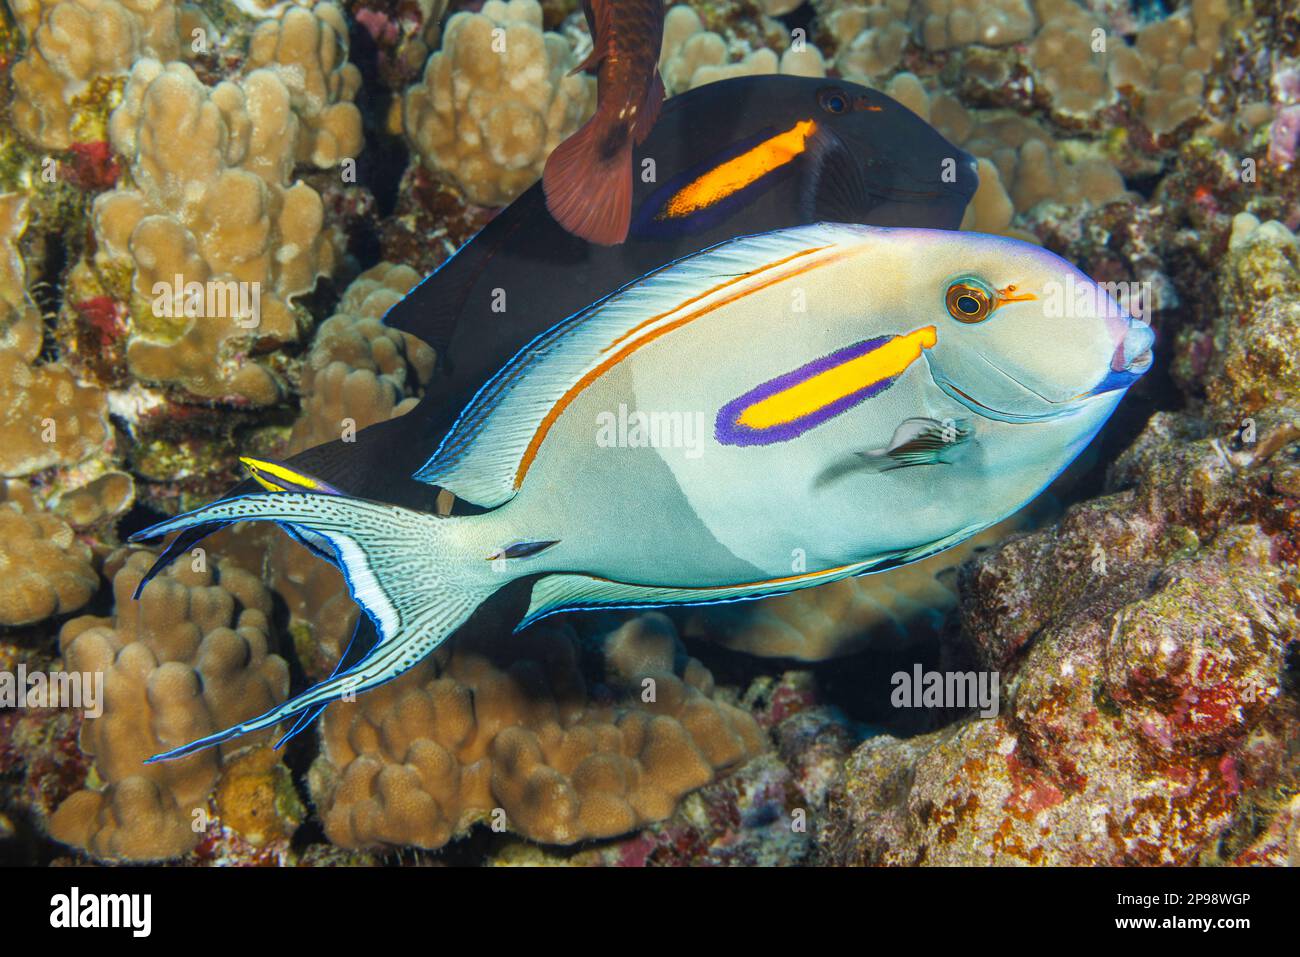 These two orangeband surgeonfish, Acanthurus olivaceus, are visiting the cleaning station of an endemic Hawaiian cleaner wrasse, Labroides phthirophag Stock Photo